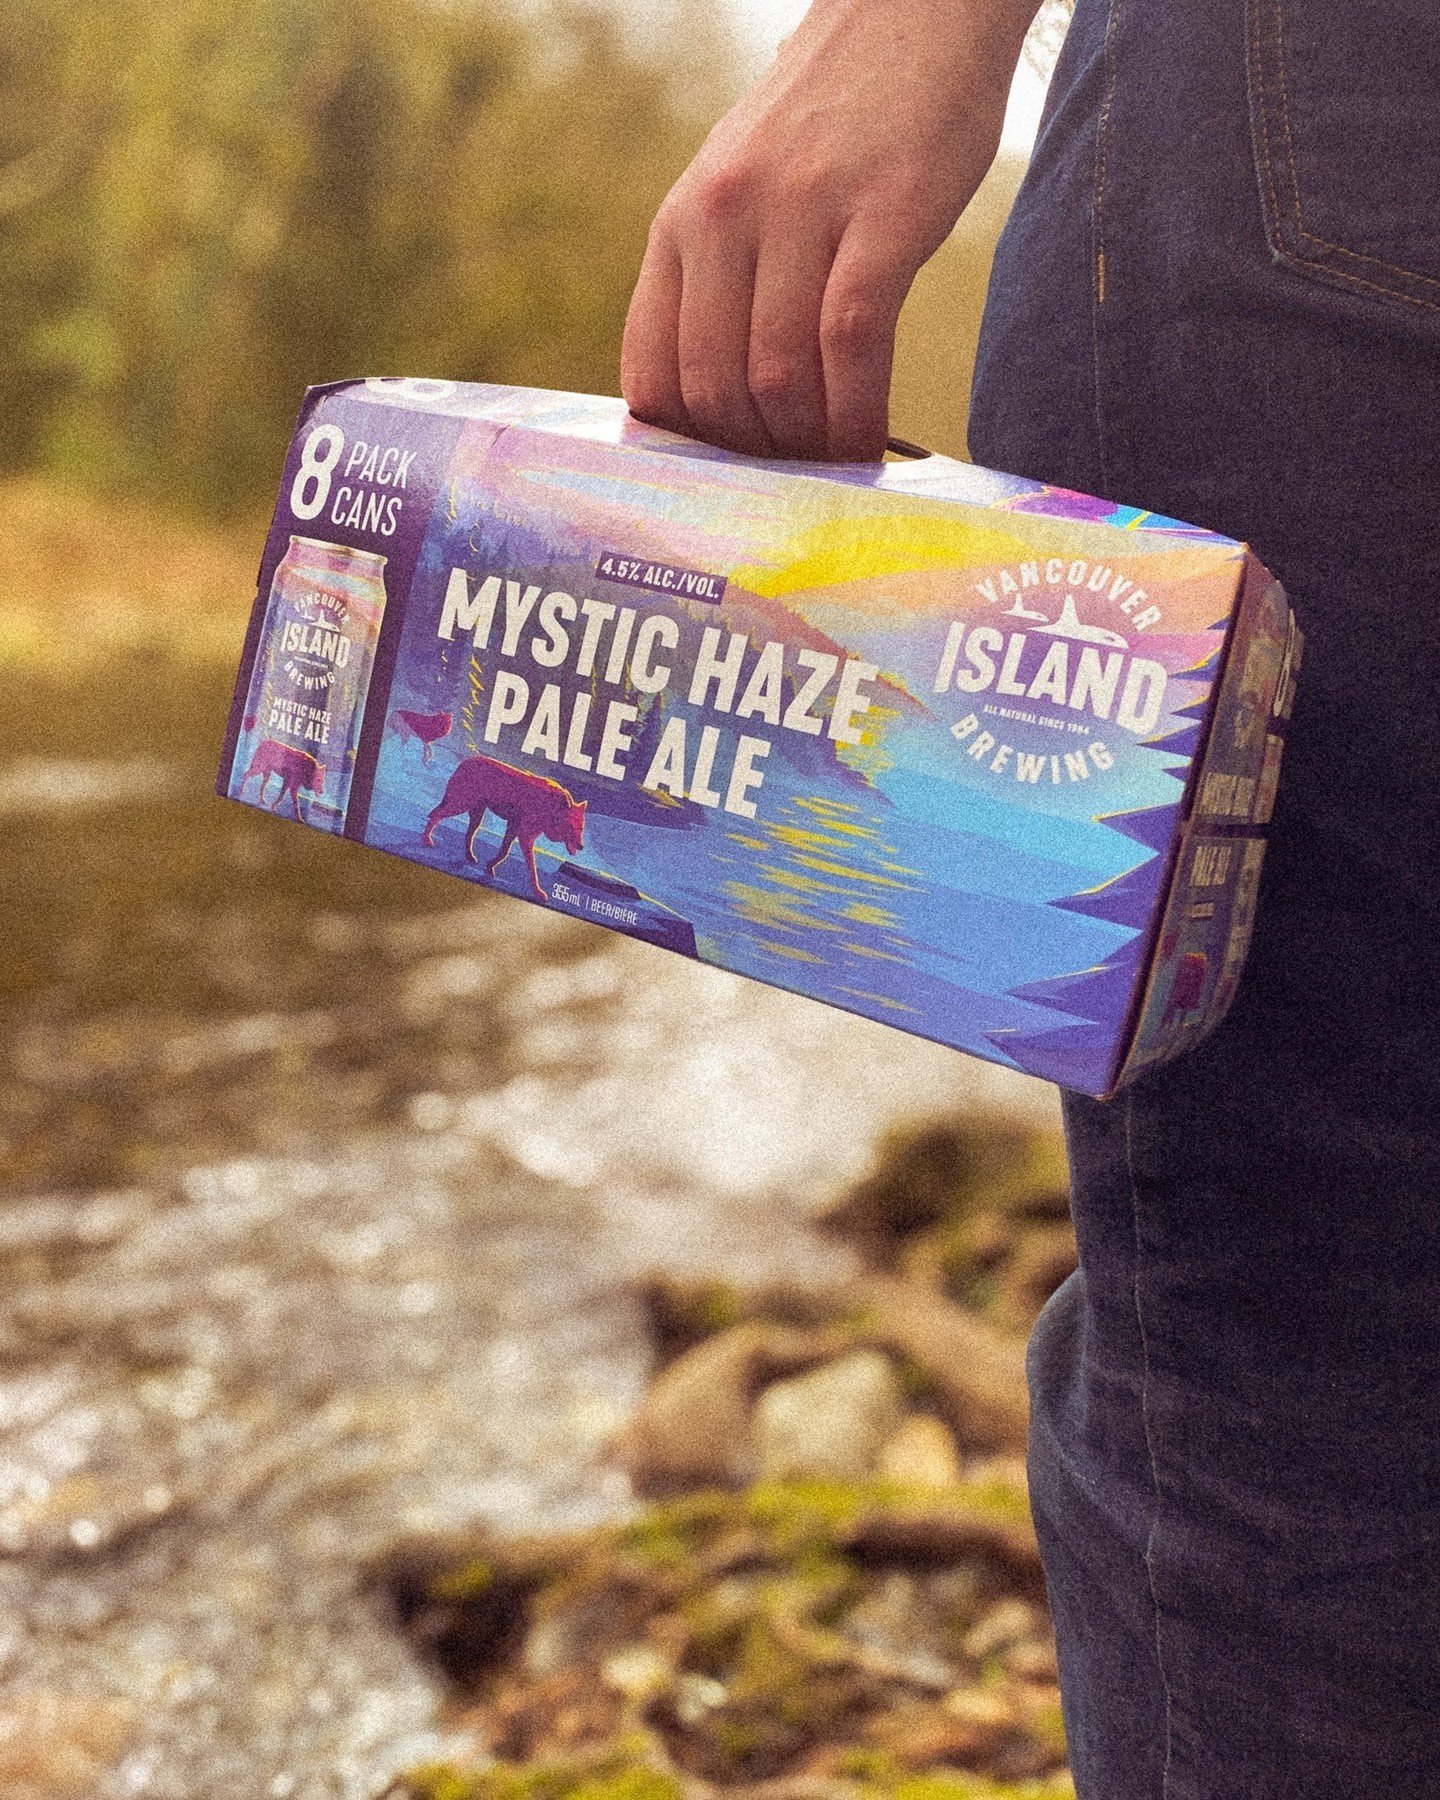 🐺Cheers to More Cheers🐺⁠
⁠
Mystic Haze Pale Ale is now in 8-packs. A full-flavored, low-alcohol, sessionable brew (now with 2 more cans to extend the session 😉)⁠
⁠
Available at your local BCL⁠
⁠
⁠
🍺MYSTIC HAZE PALE ALE 🍺⁠
⁠
ABV: 4.5% ⁠
⁠
IBU: 20